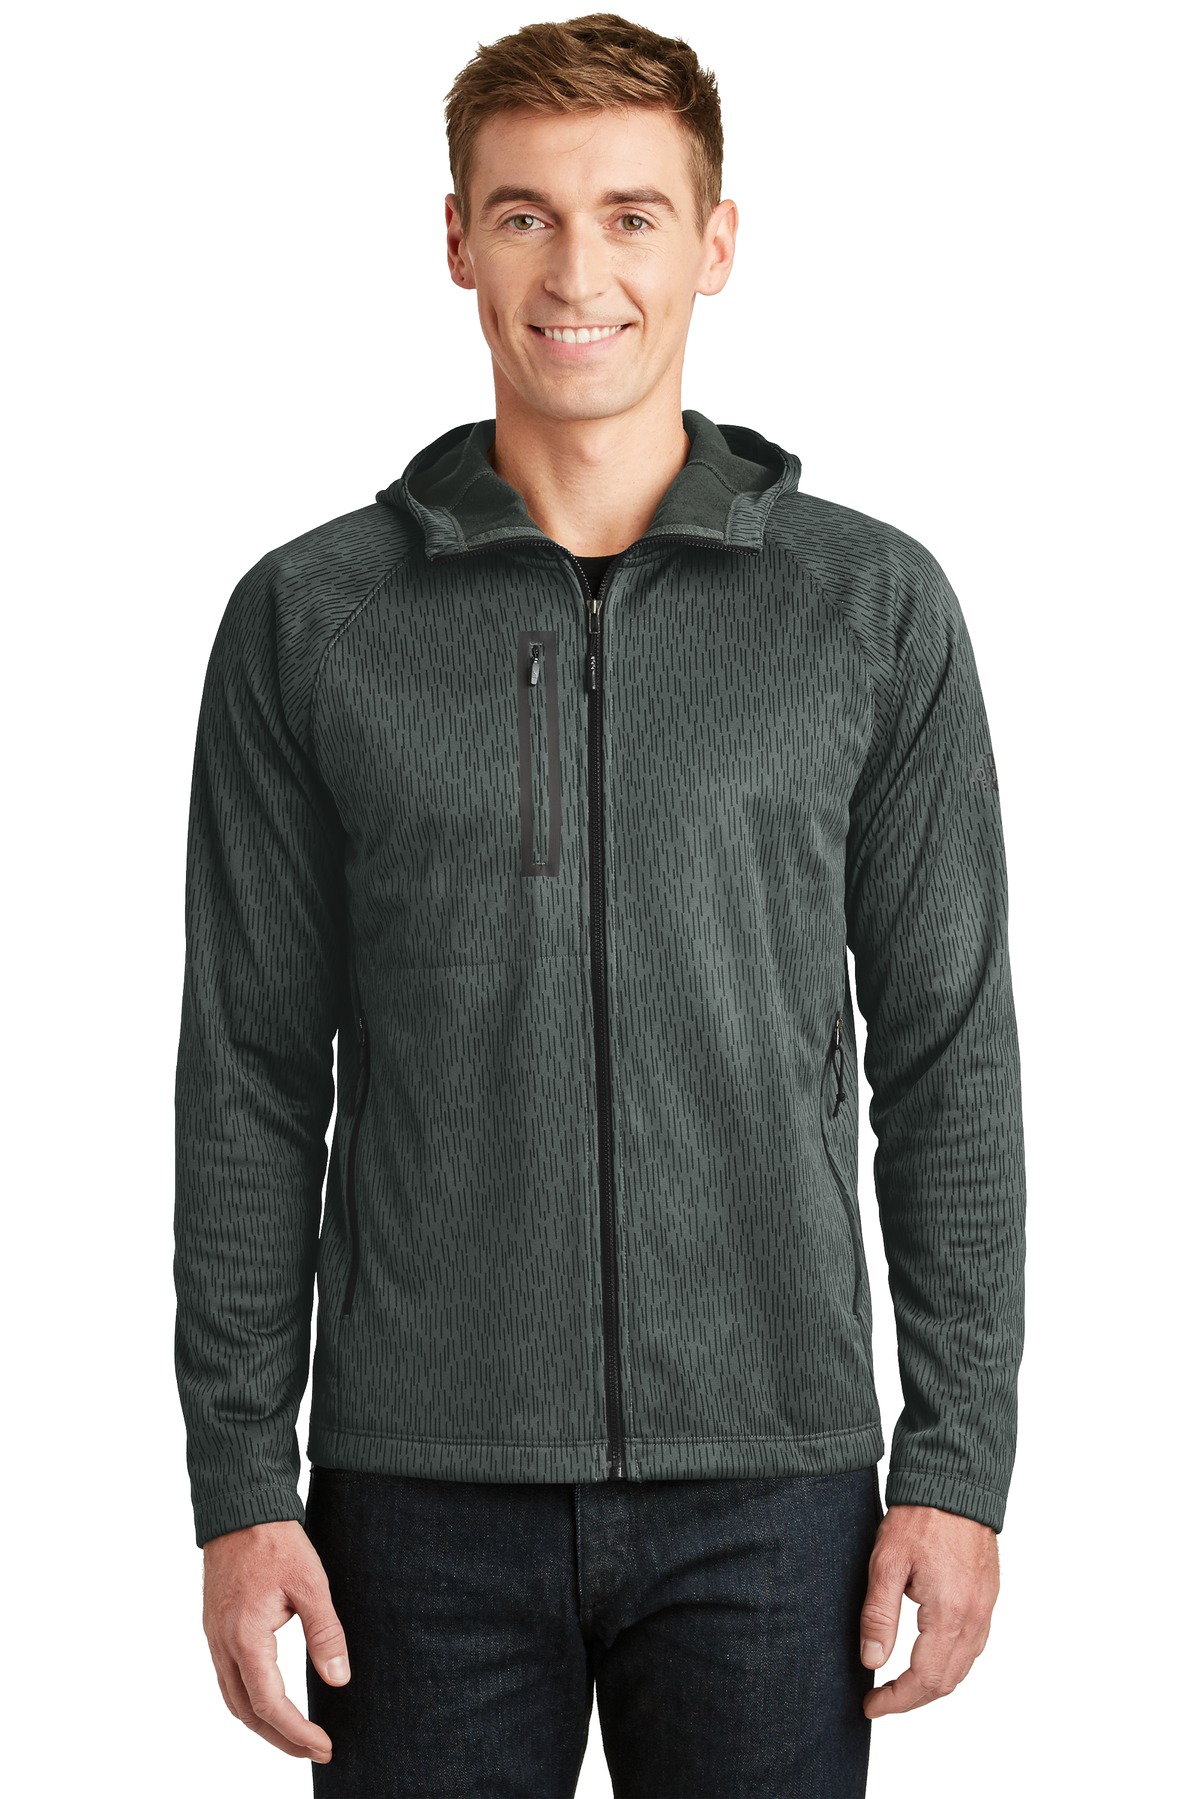 The North Face  Canyon Flats Fleece Hooded Jacket. NF0A3LHH